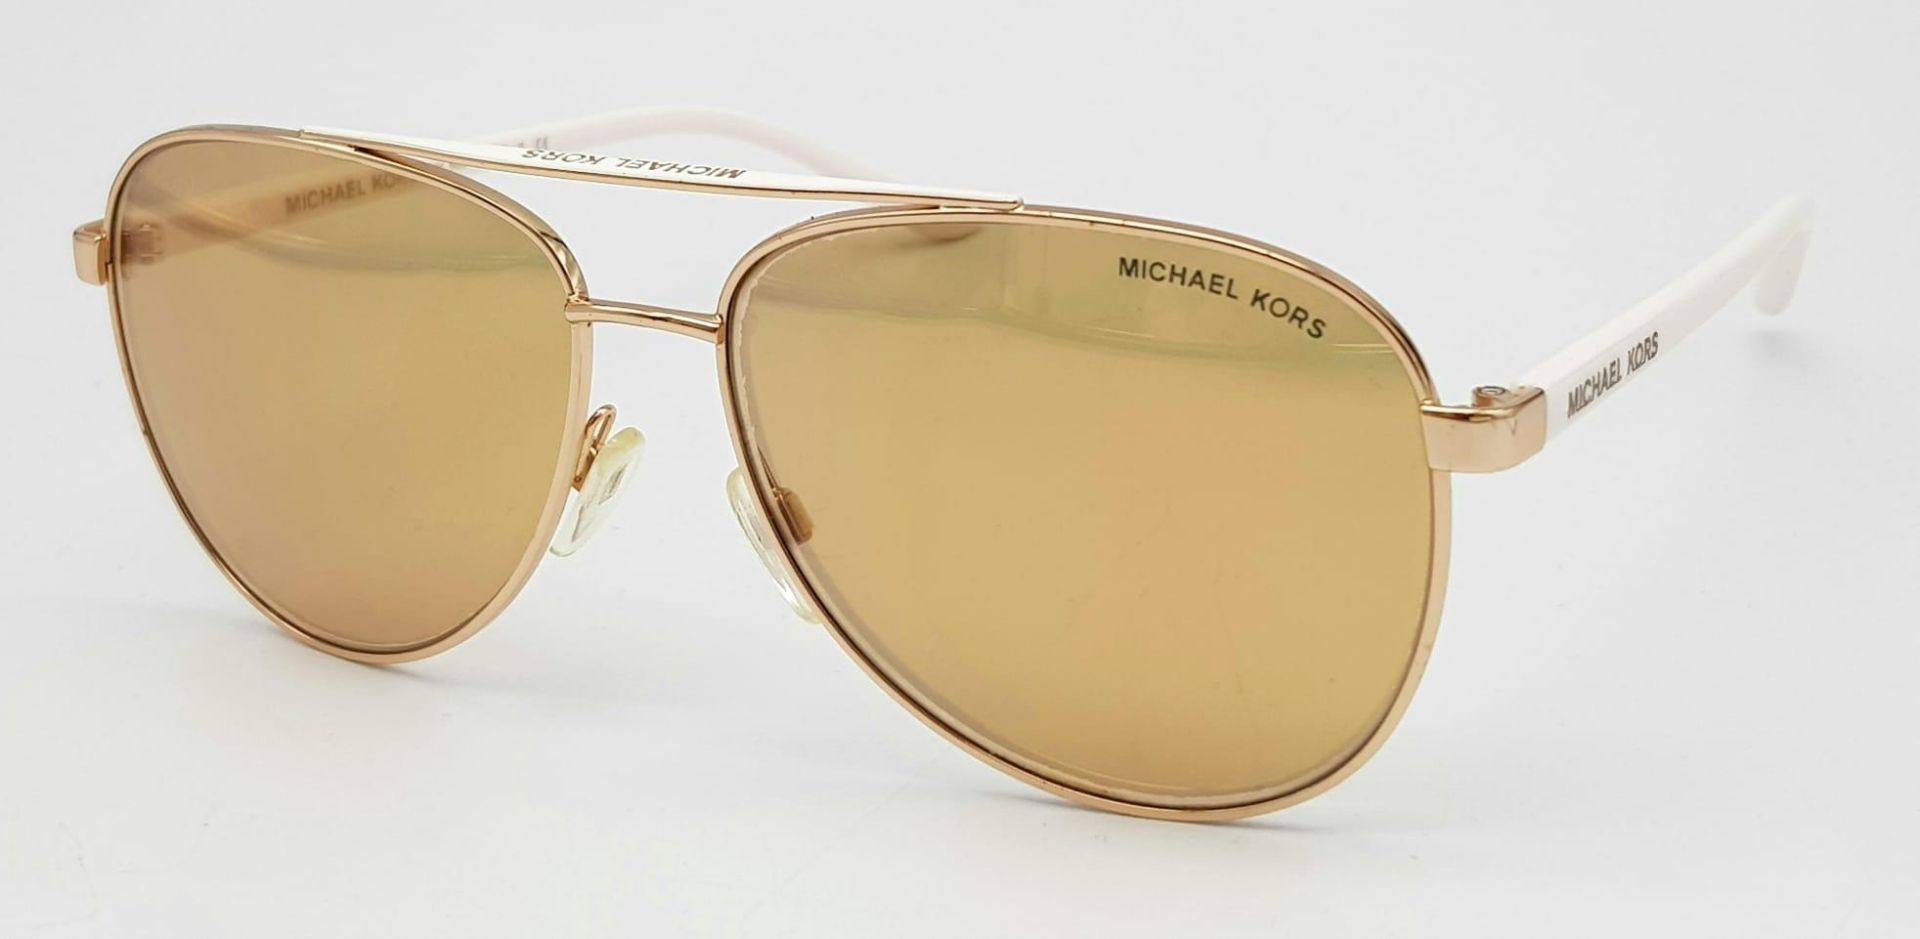 A Pair of Michael Kors Sunglasses with Case. - Image 3 of 7